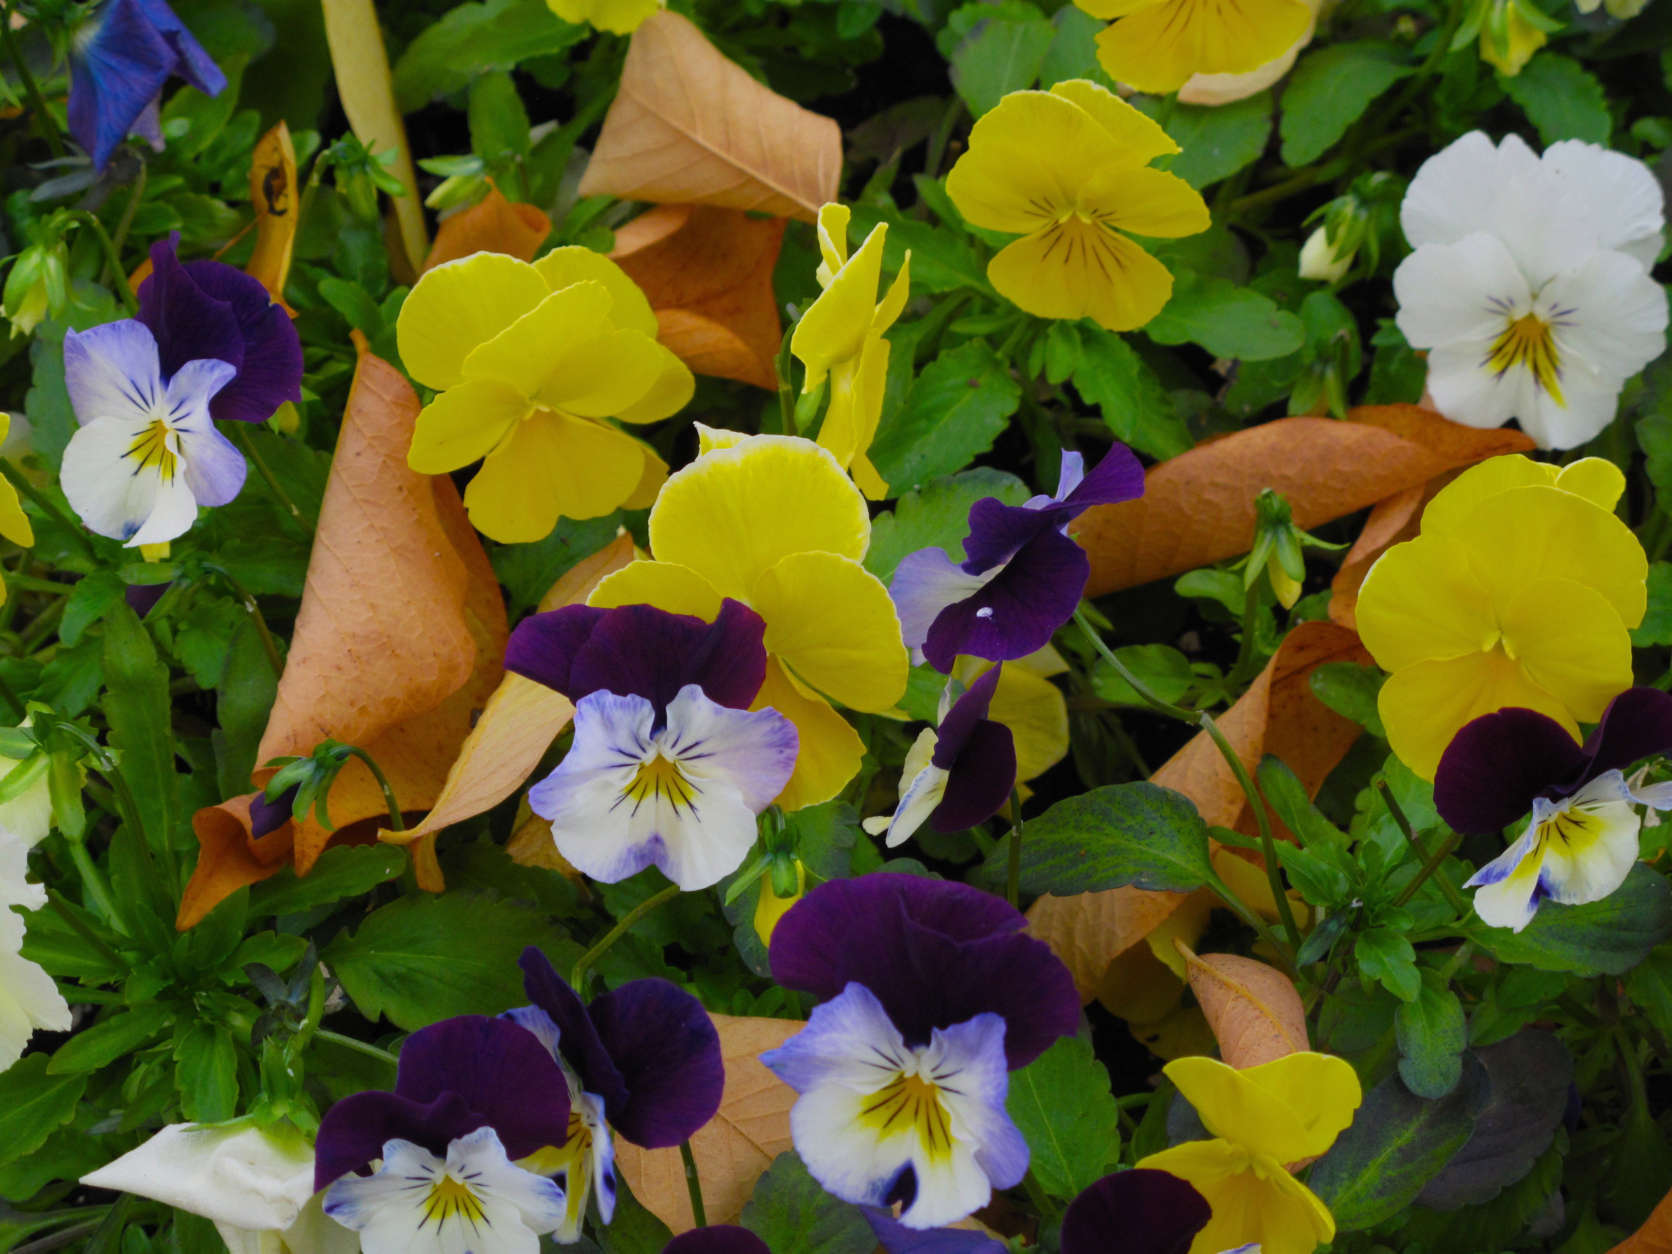 This Friday, Nov. 2, 2012, photo shows cool wave pansies that tolerate several light frosts and go dormant after a hard frost, in Langley, Wash. Their colors intensify in the cold and they bloom even in the snow, and recover in early spring. (AP Photo/Dean Fosdick)